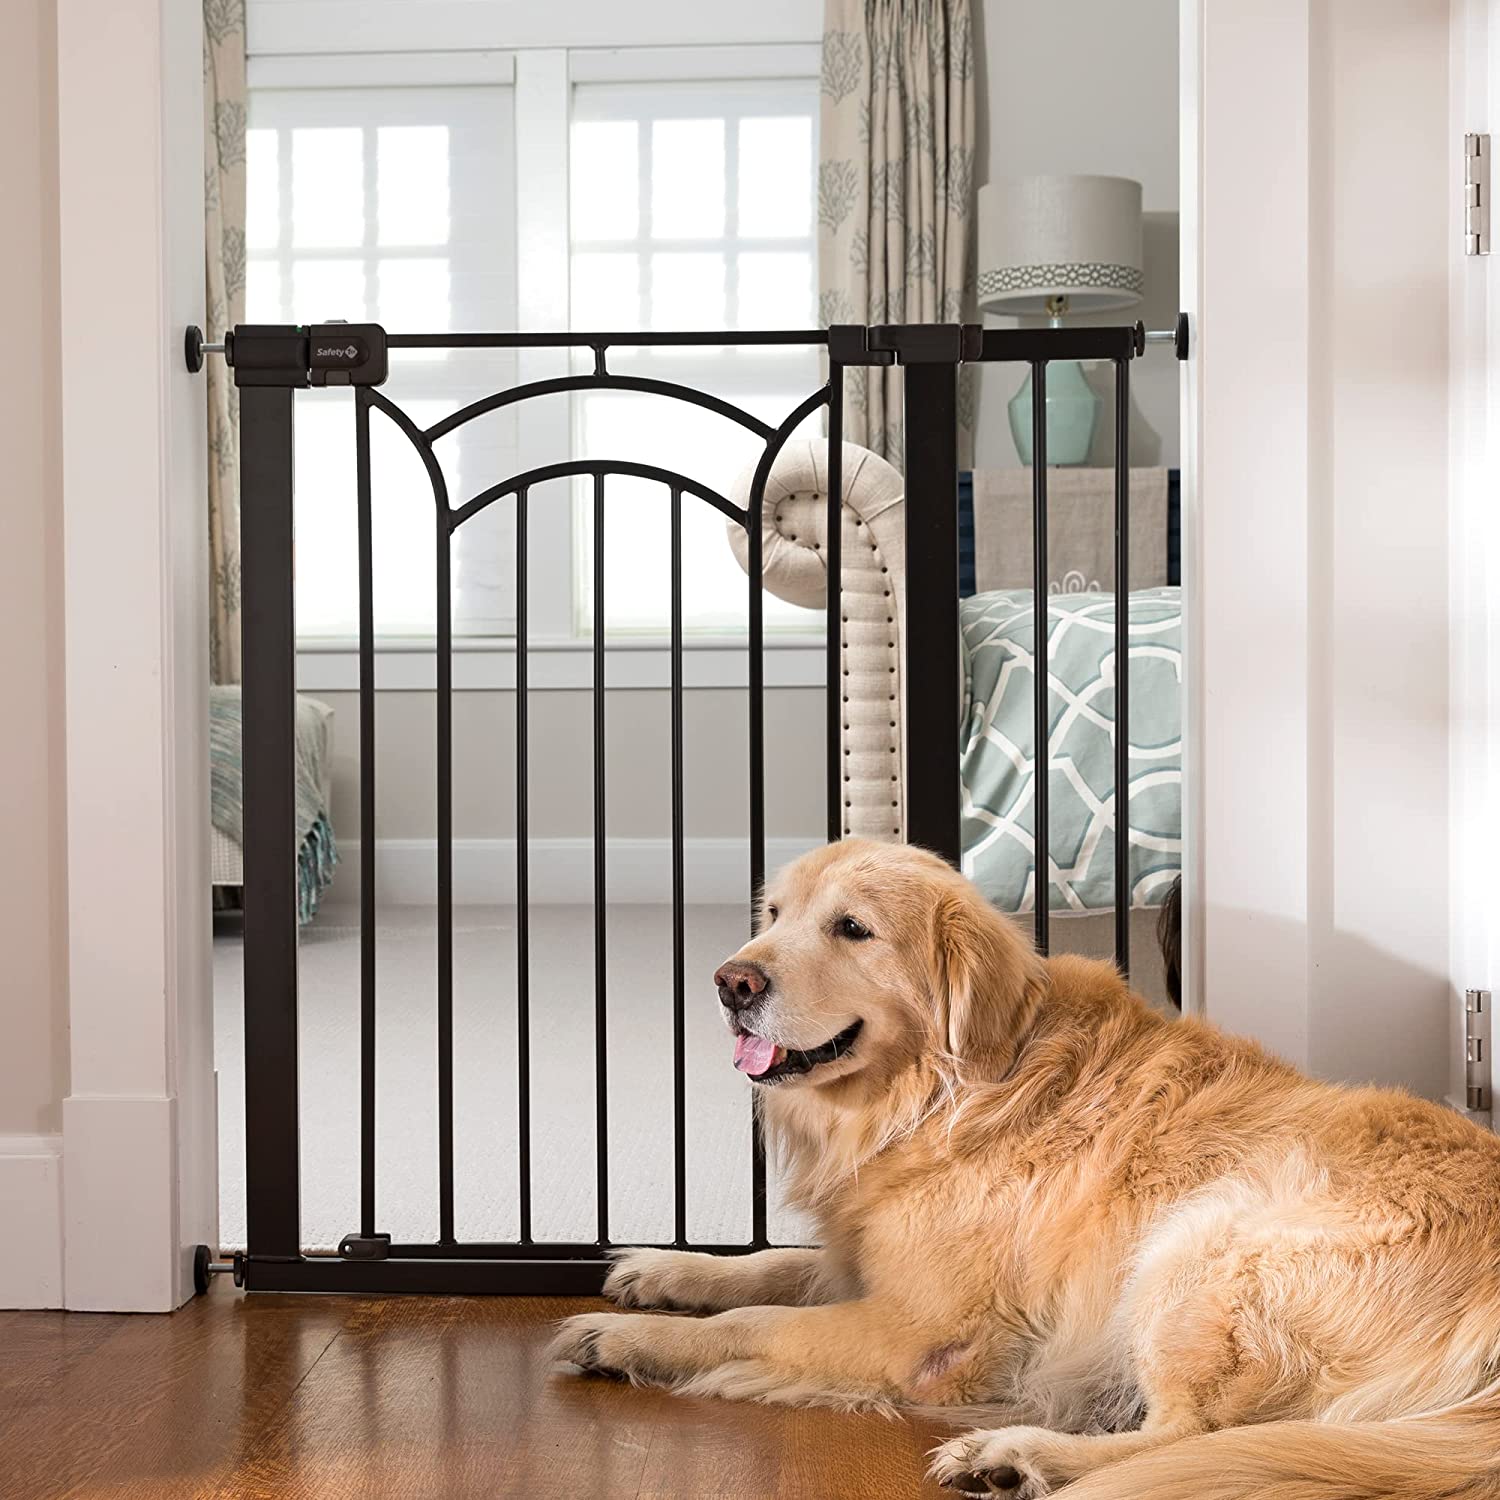 Amazon dirty paw tricks Safety 1st Easy Install Tall and Wide Gate